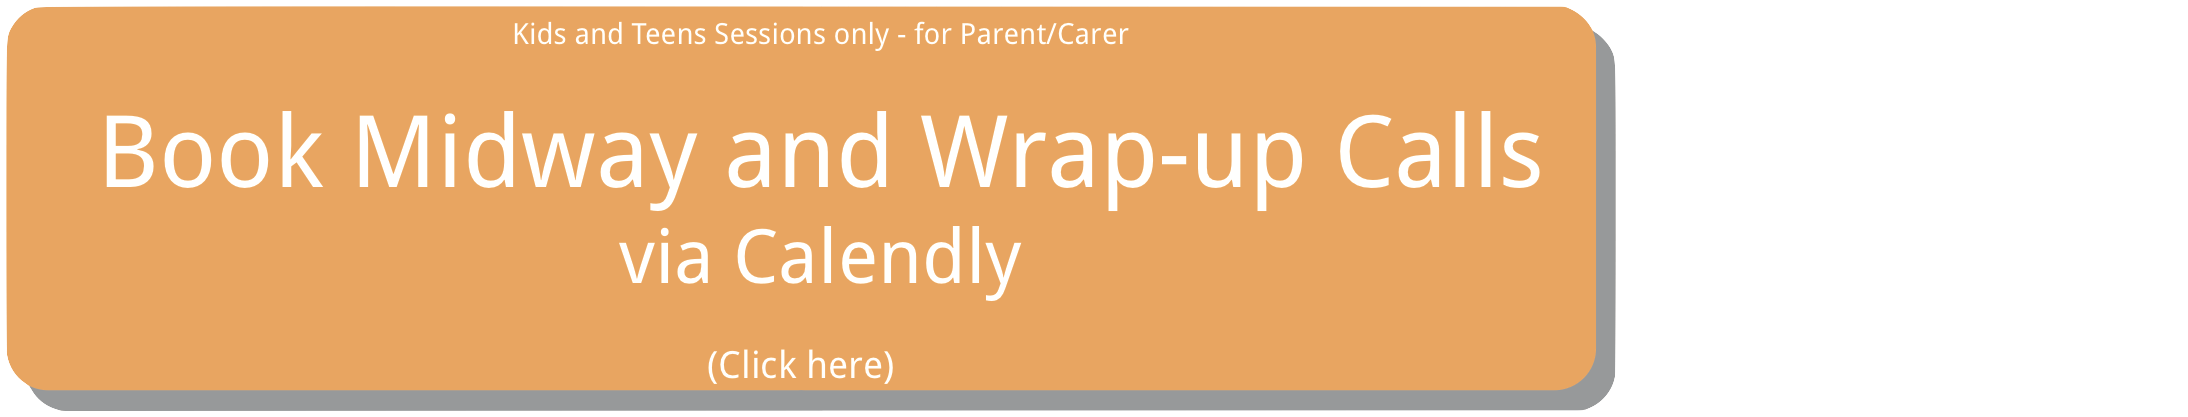 Step 7. For parents or carers of kids and teens, book mid way call  and wrap up call via Calendly.